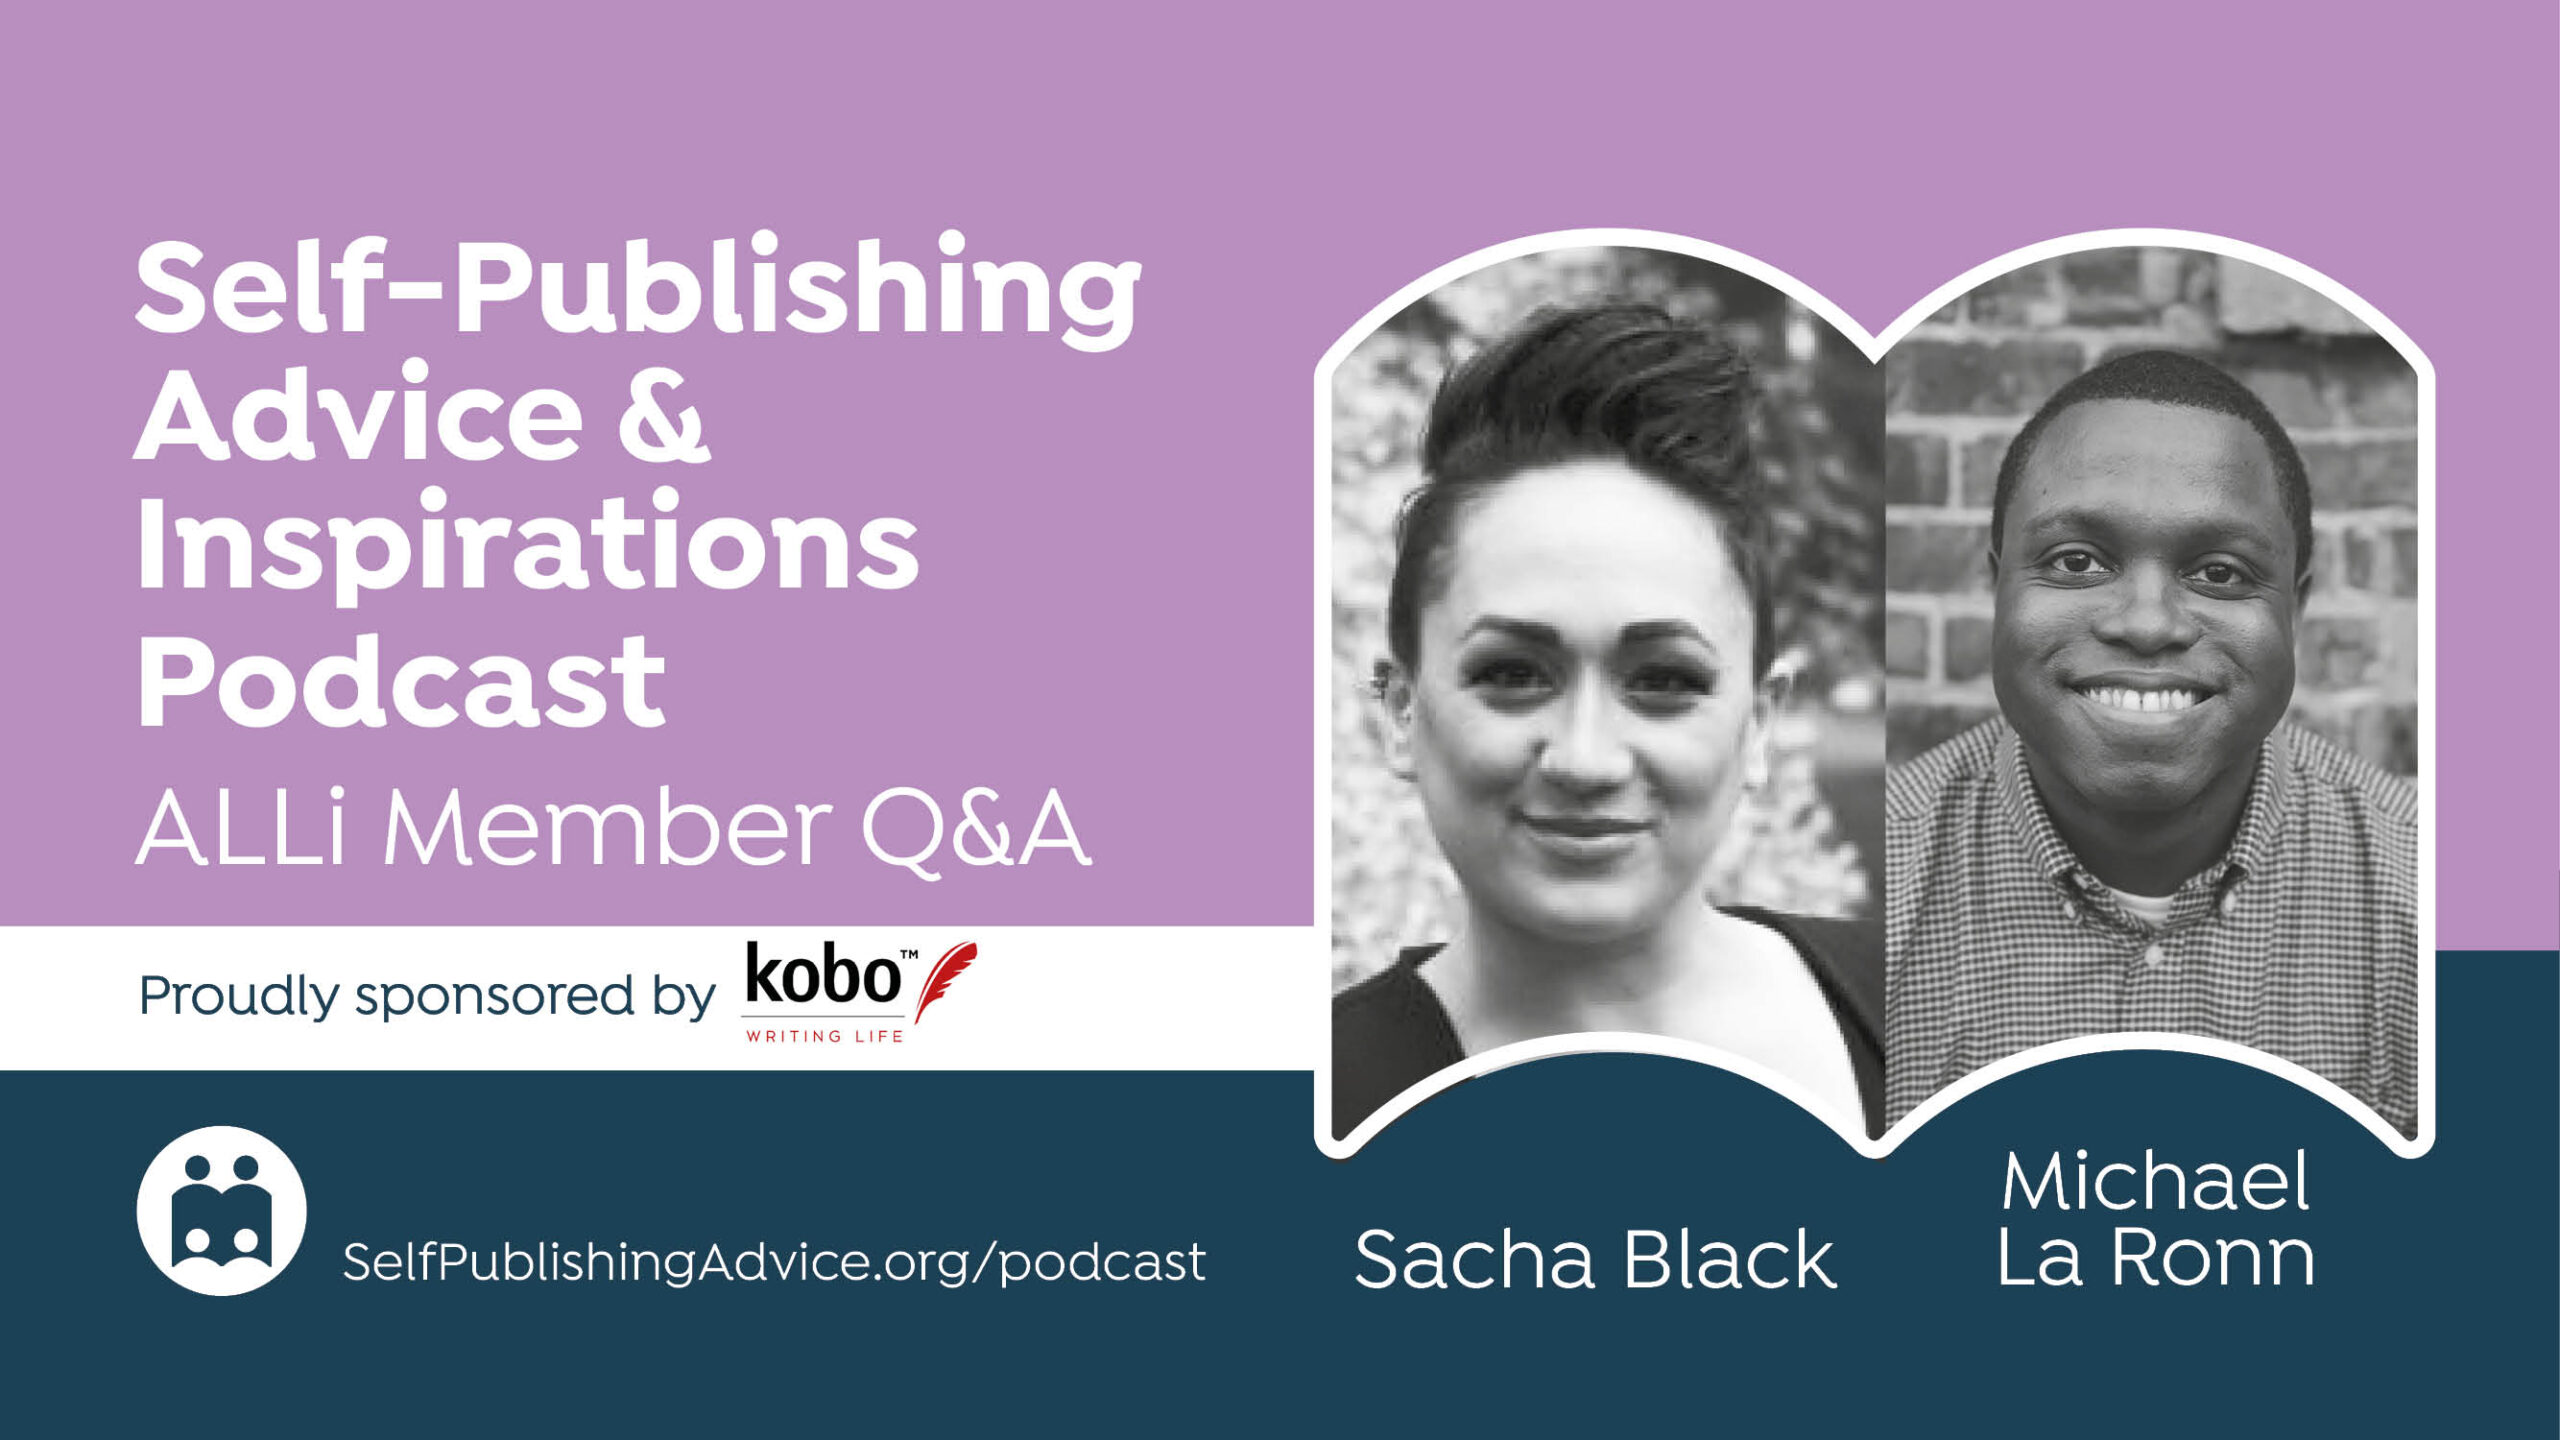 PODCAST: Cover Plagiarism, Registering Copyrights For ARCs, And Character Back Stories In Our Member Q&A